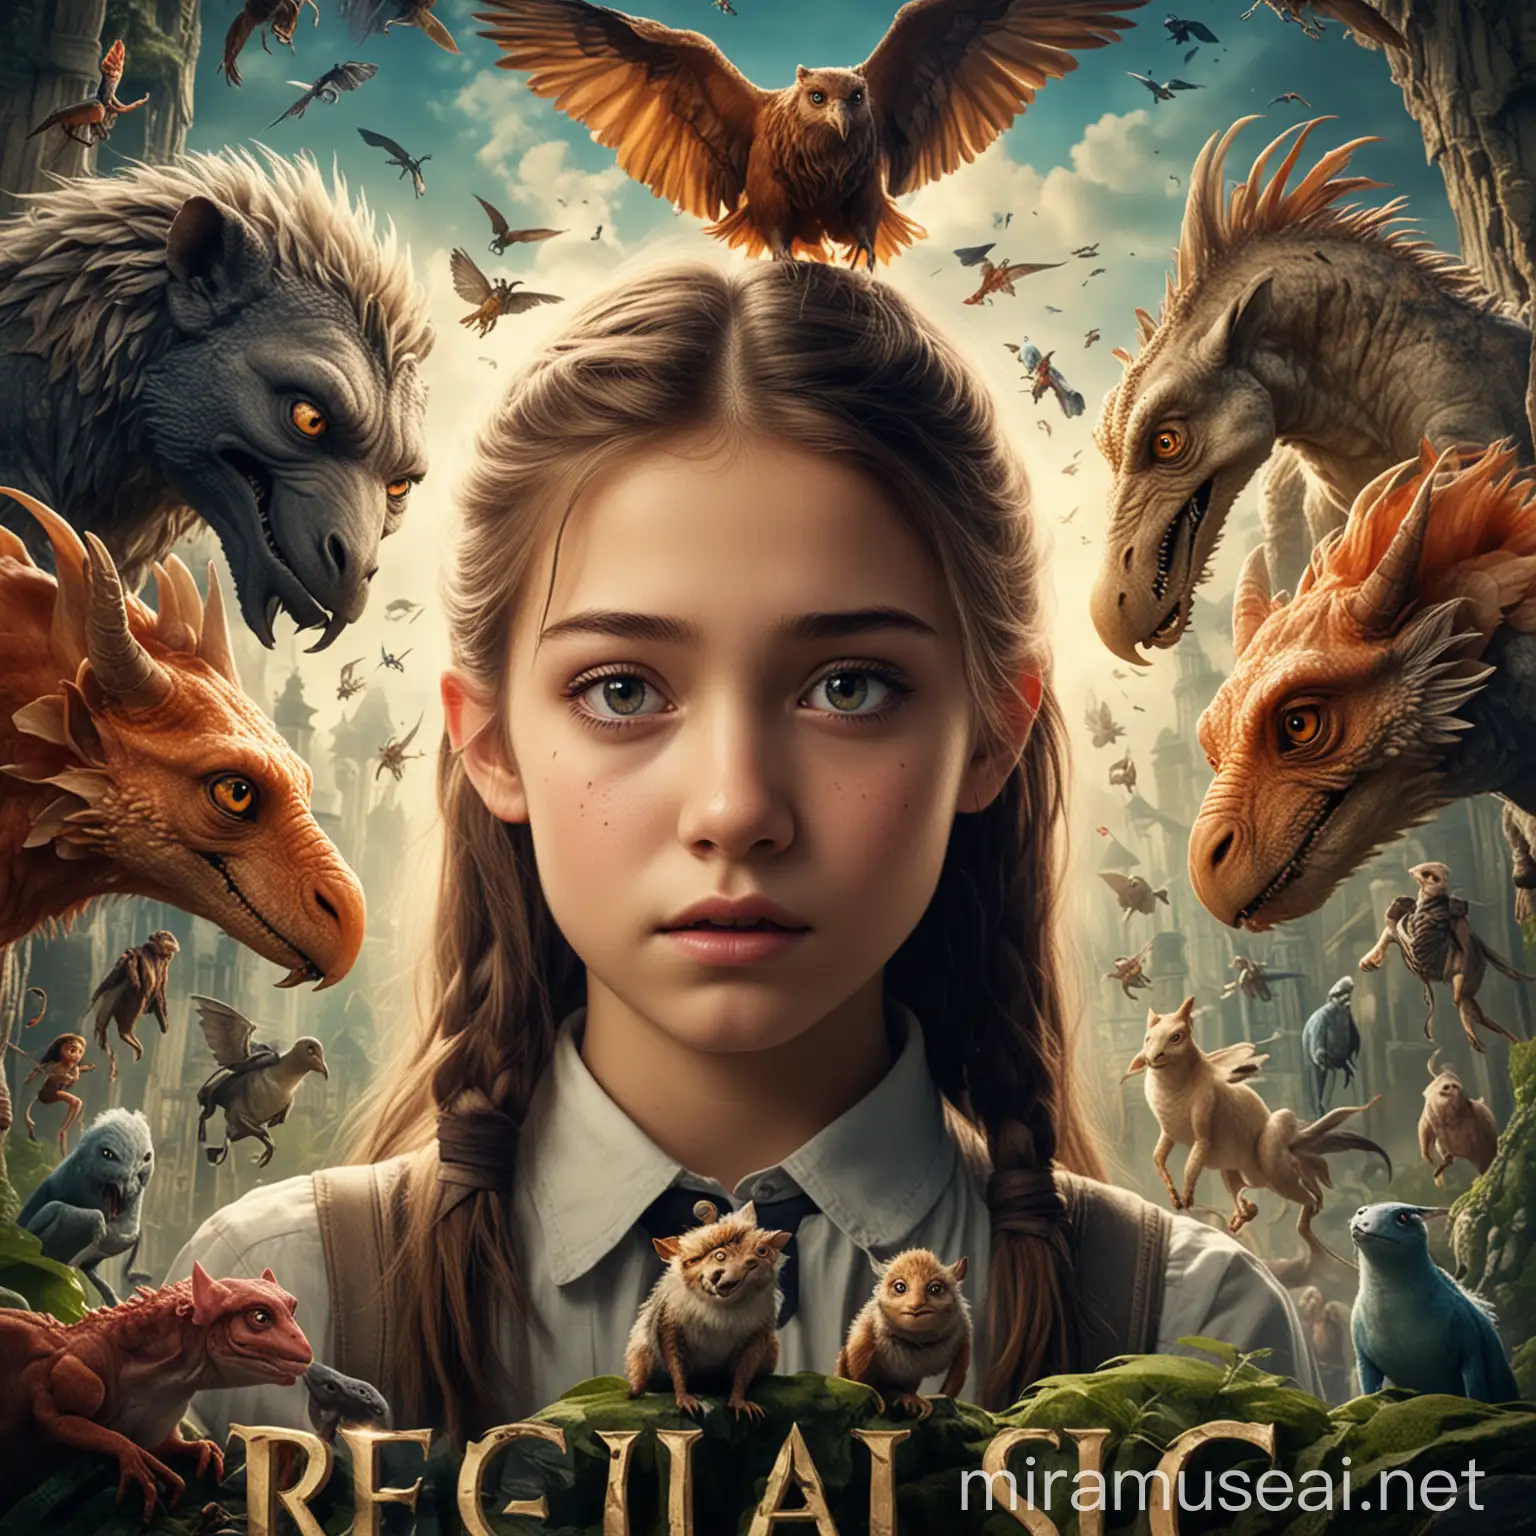 realistic teenager fantasy movie poster with creatures and diversity. Tension in the air